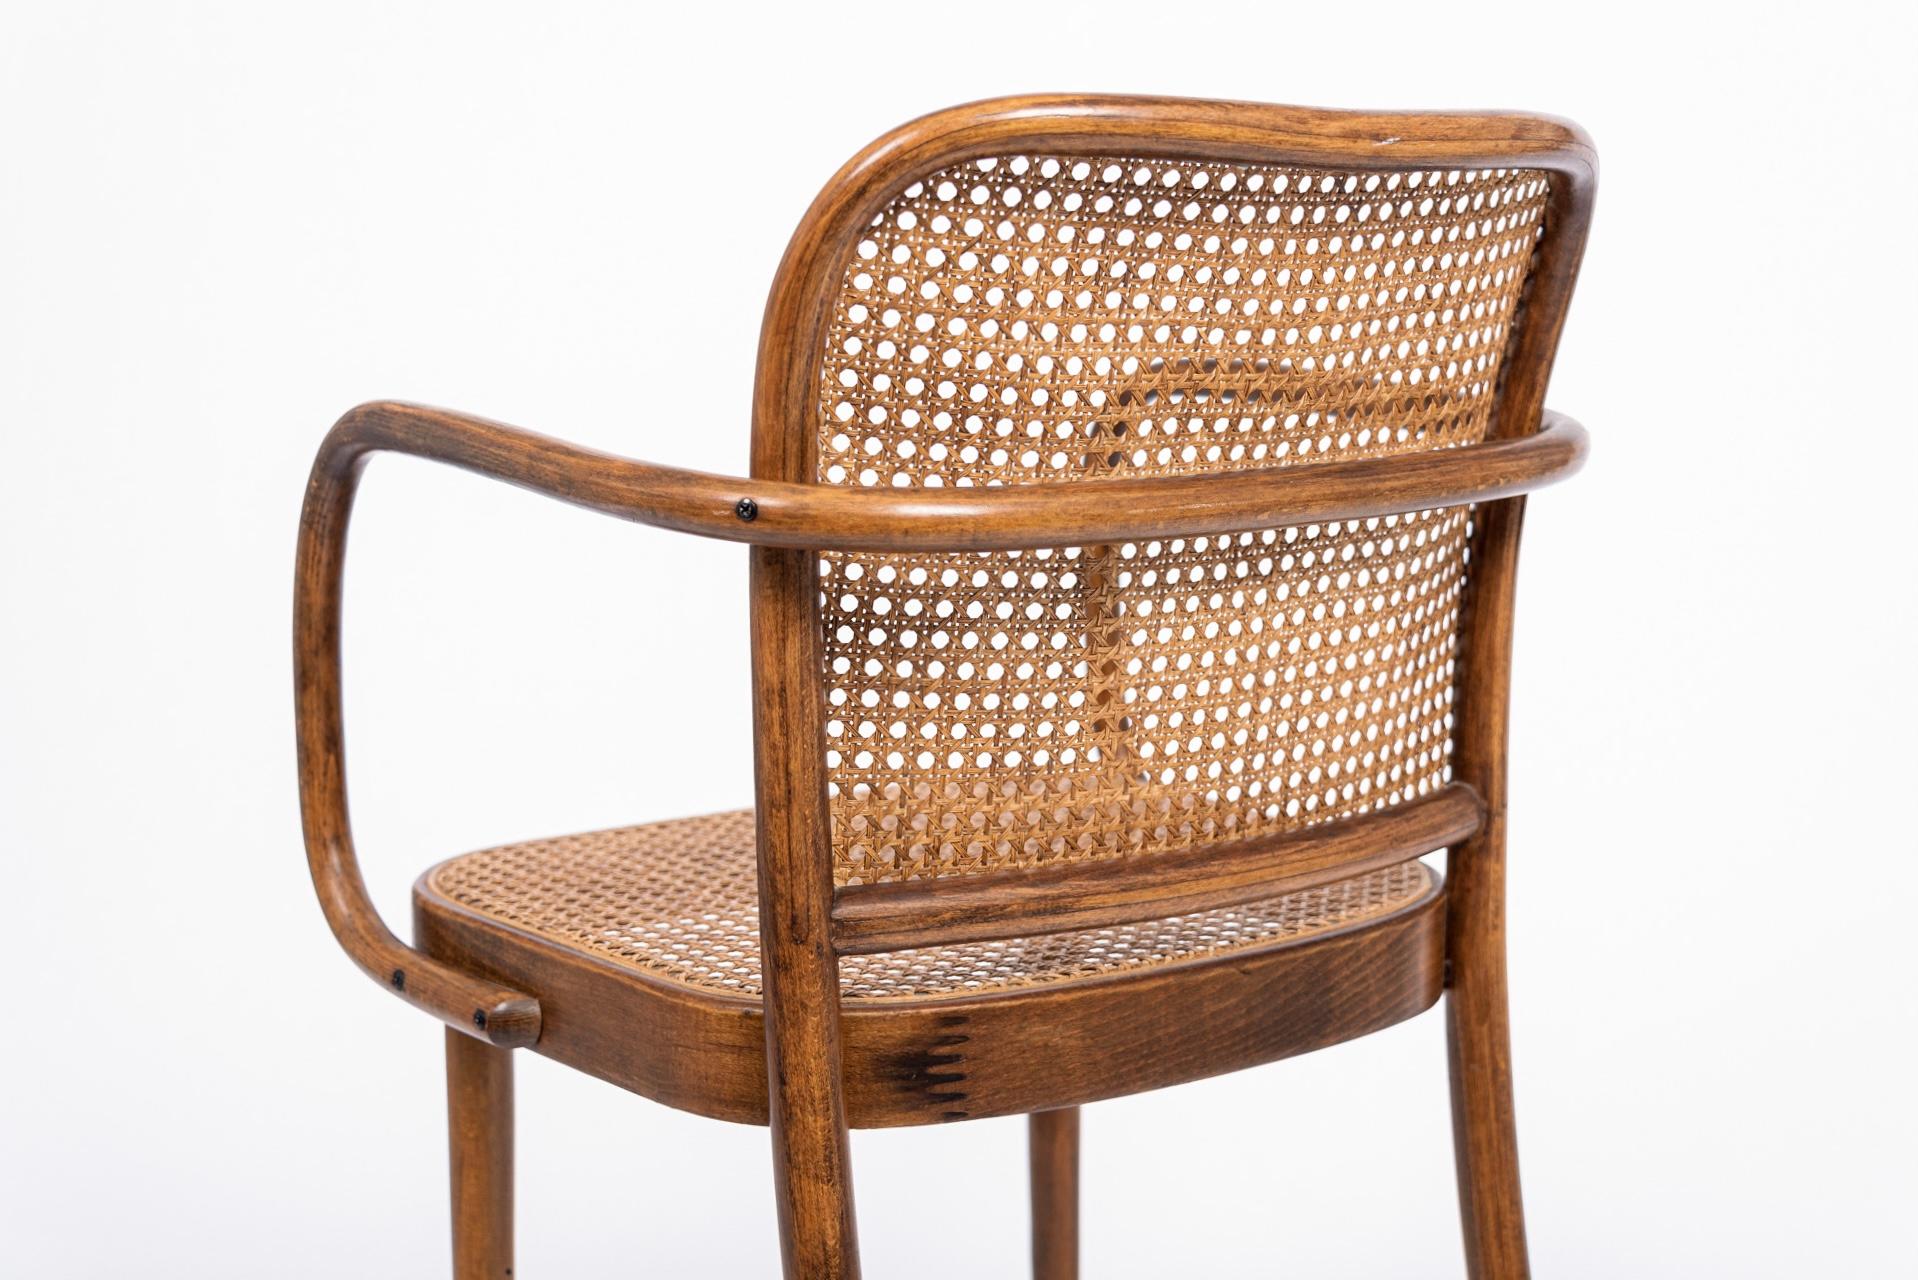 20th Century Midcentury Bentwood & Cane Cafe Chair by Joseph Hoffman for Stendig